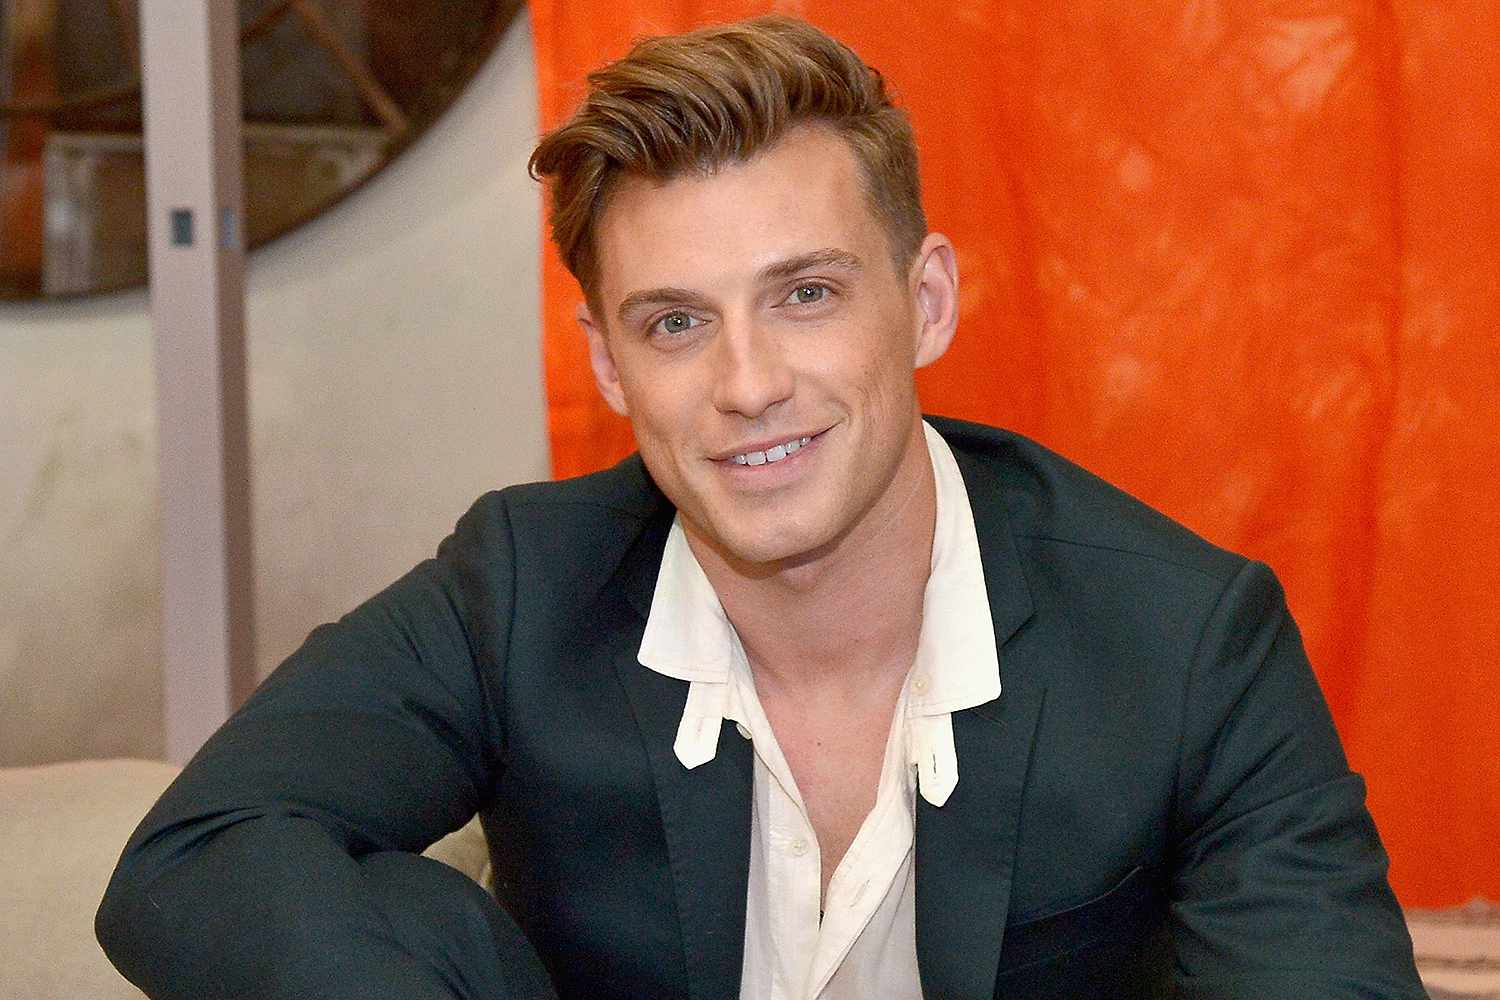 39 Facts About Jeremiah Brent - Facts.net